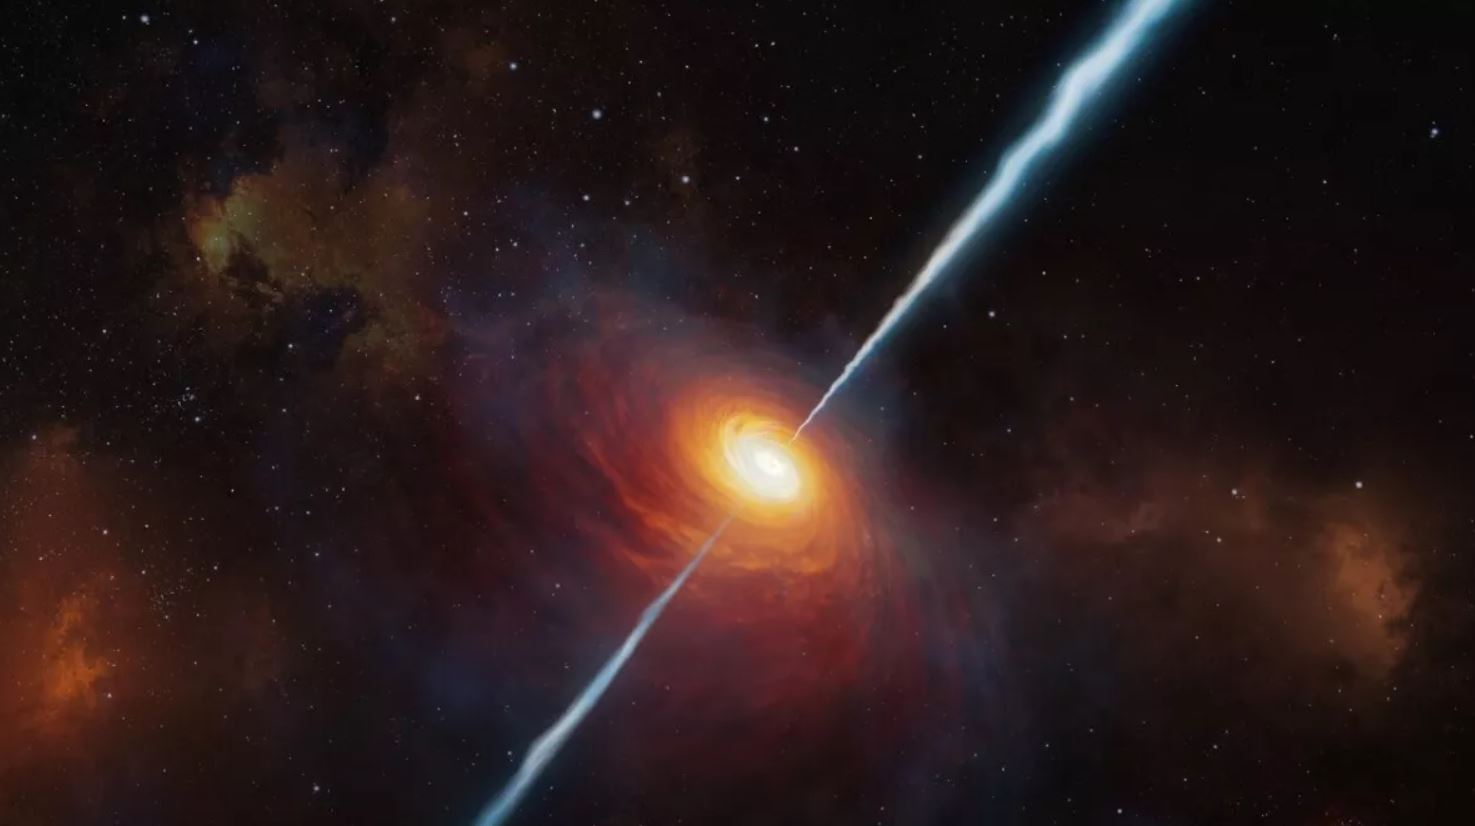 Quasar ‘Clocks’ Unveil Time Moving 5 Times Slower in the First Billion Years Following the Big Bang